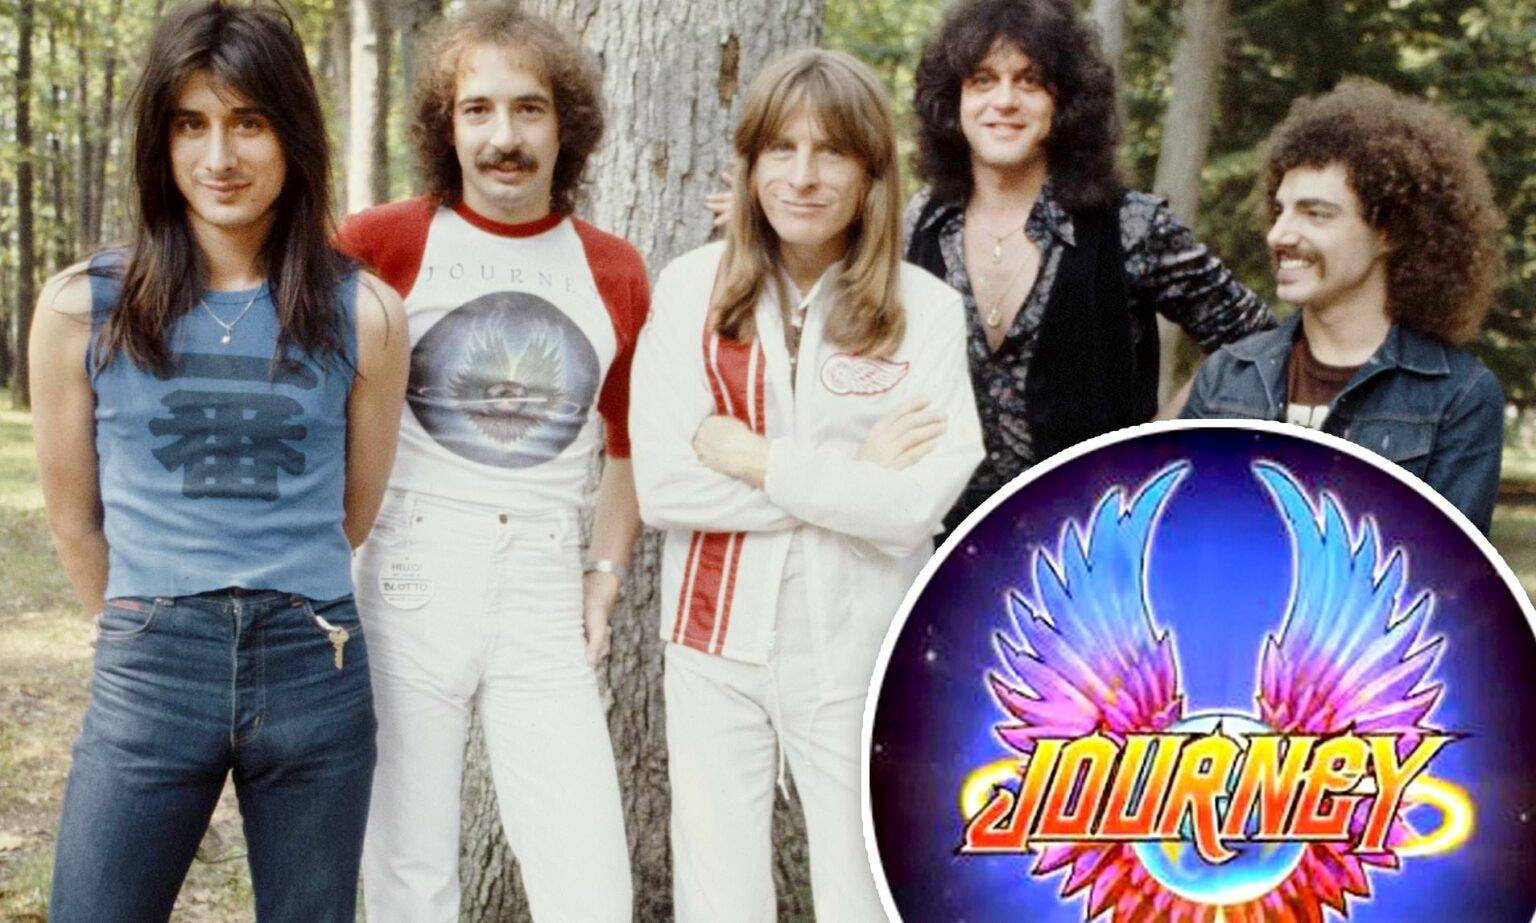 is the band journey still alive